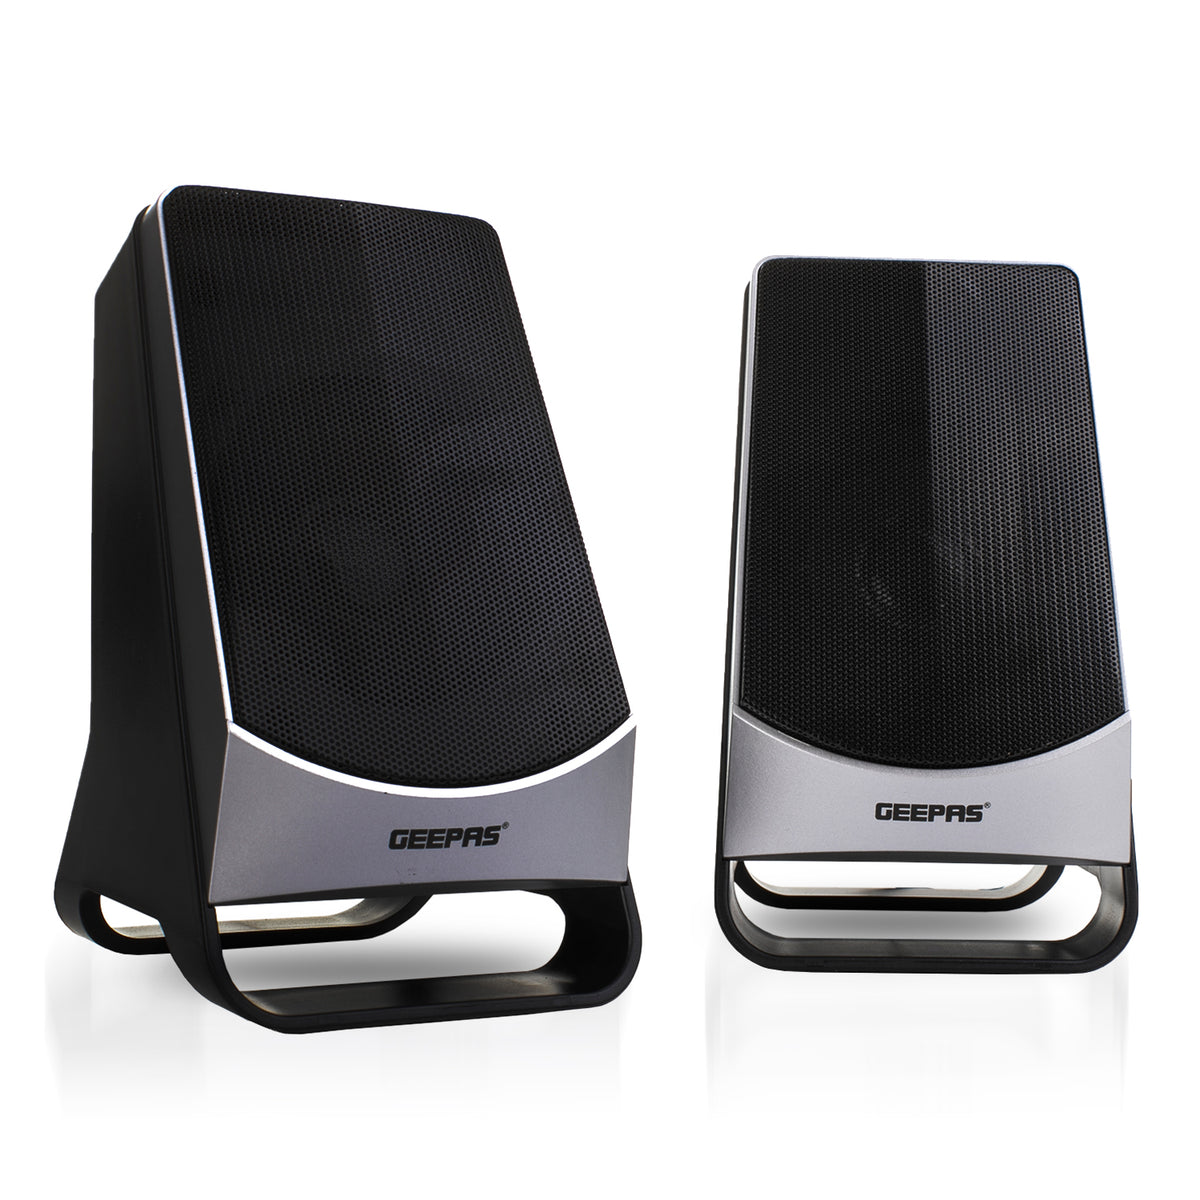 Geepas | For you. For life. Stereo USB Speakers For Laptop, TV and More Speakers